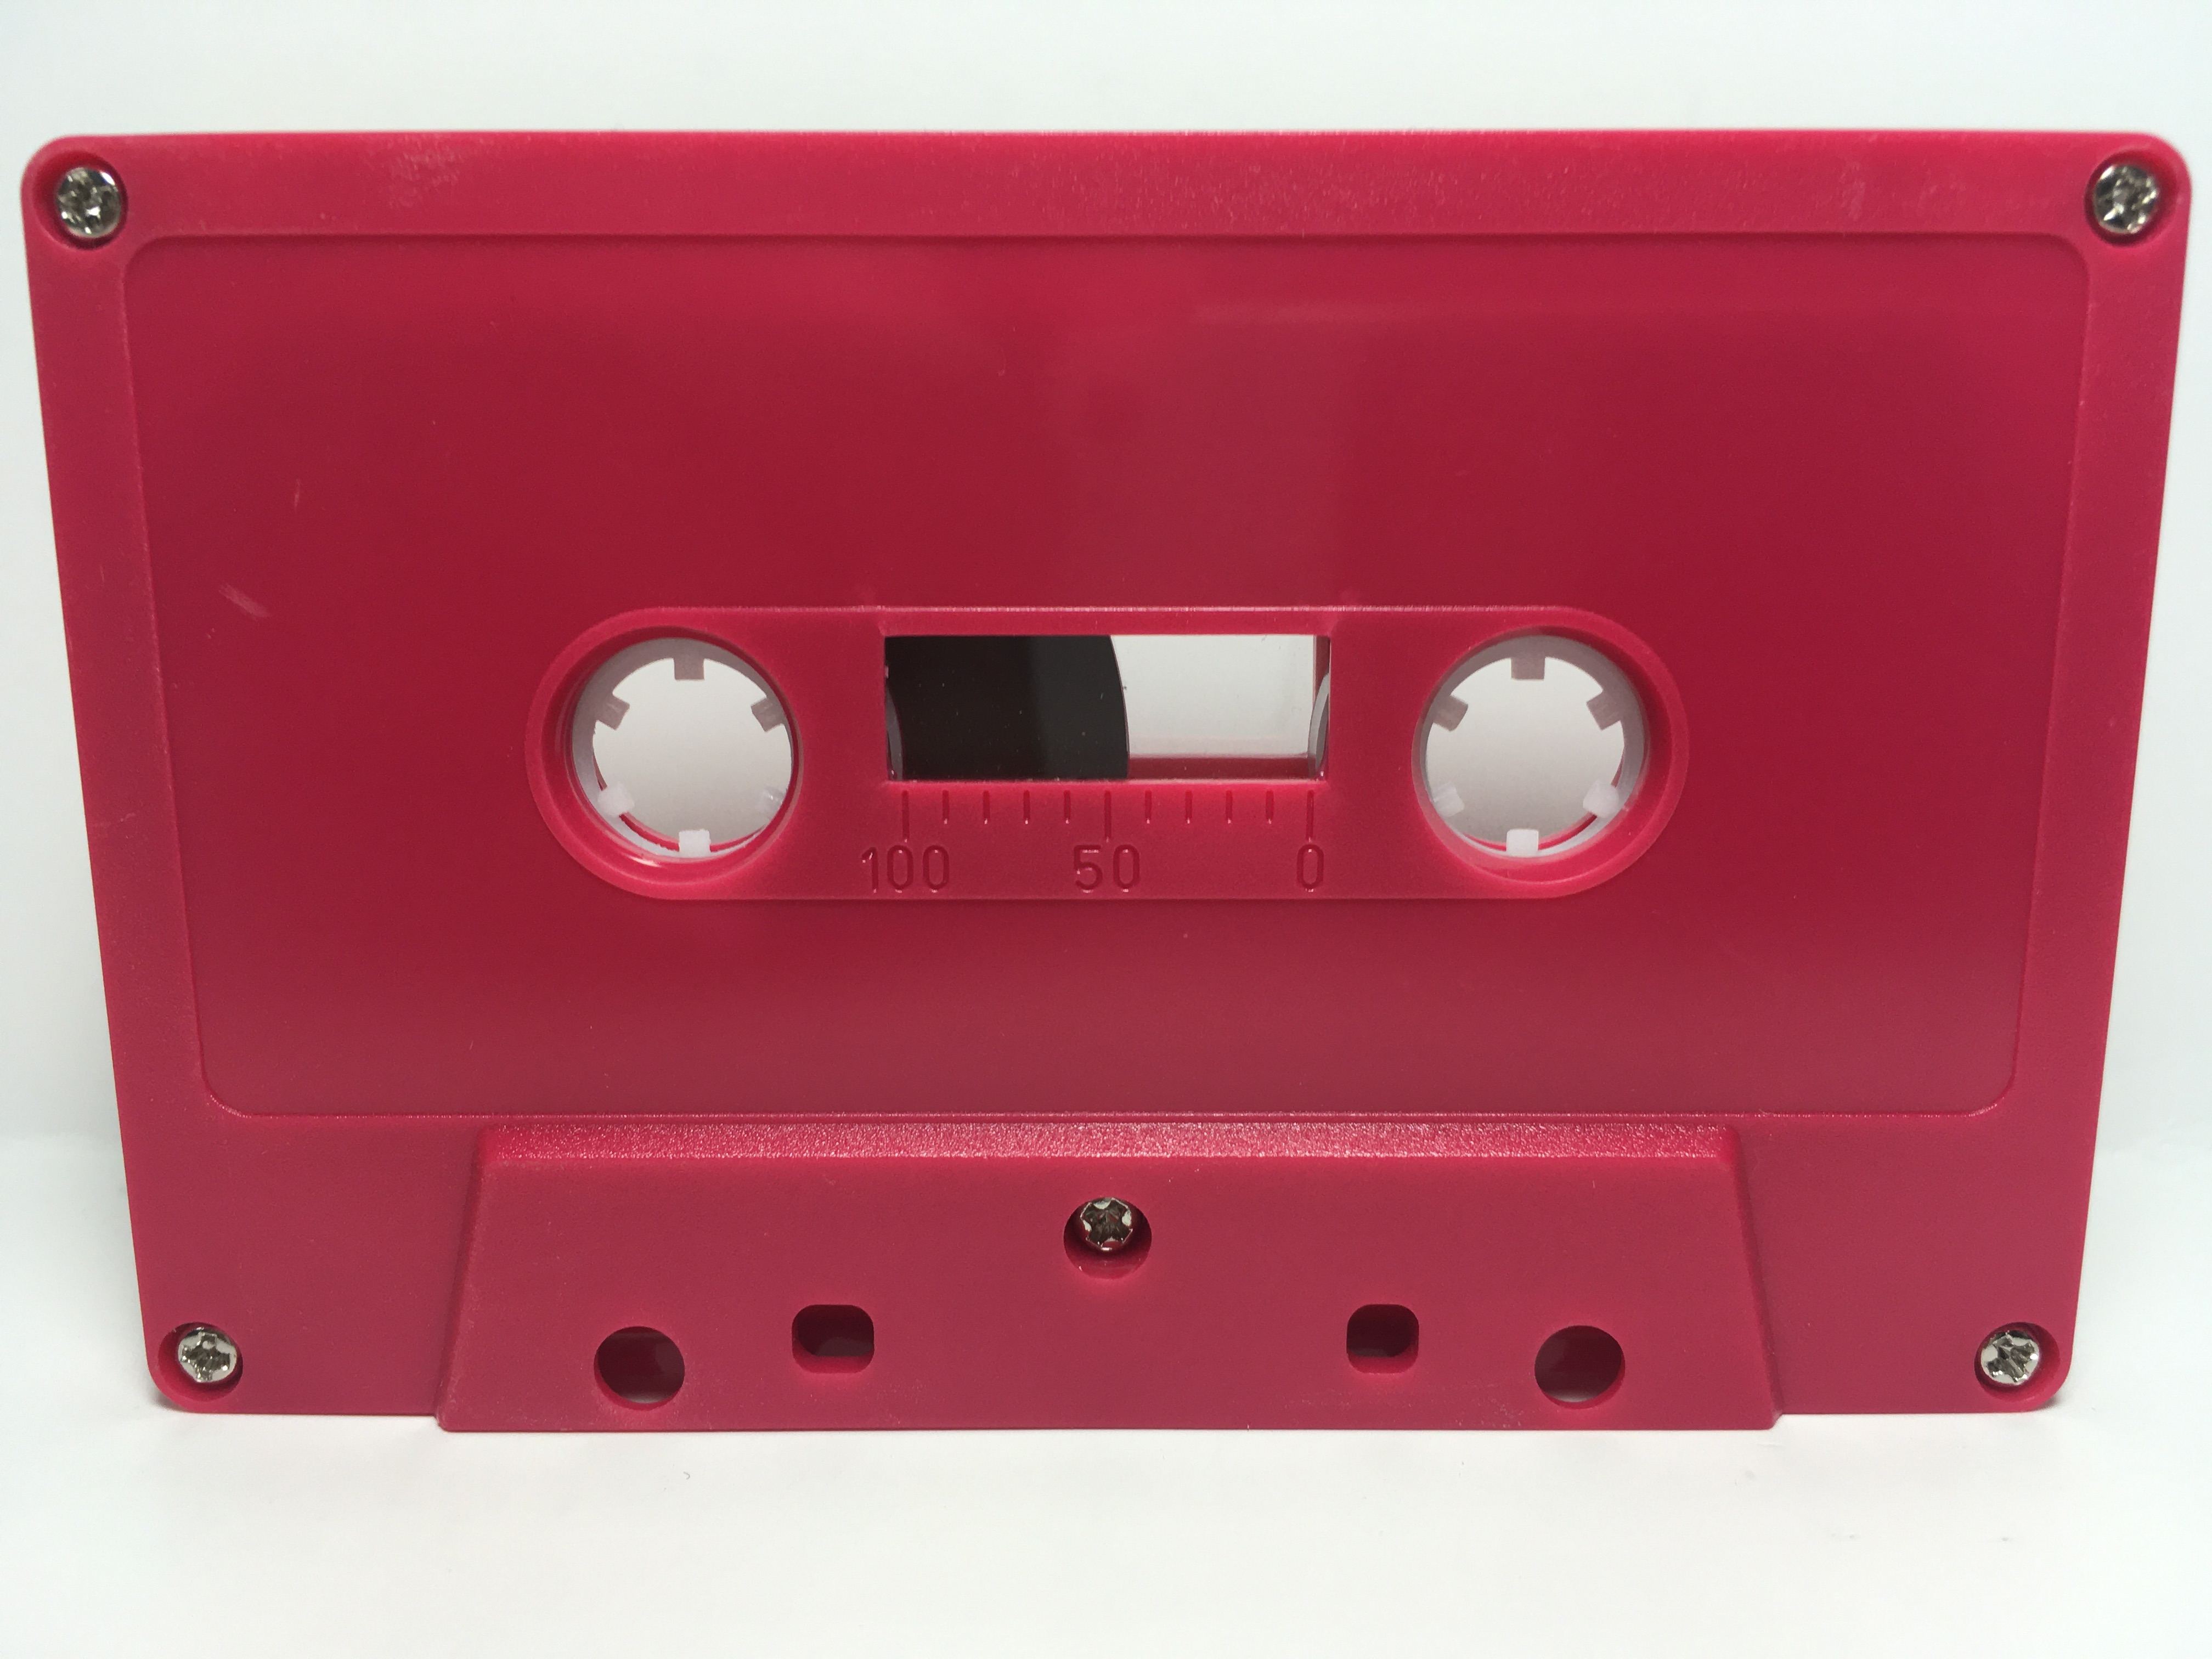 C-44 Normal Bias Rubine Red Cassettes 16 pack